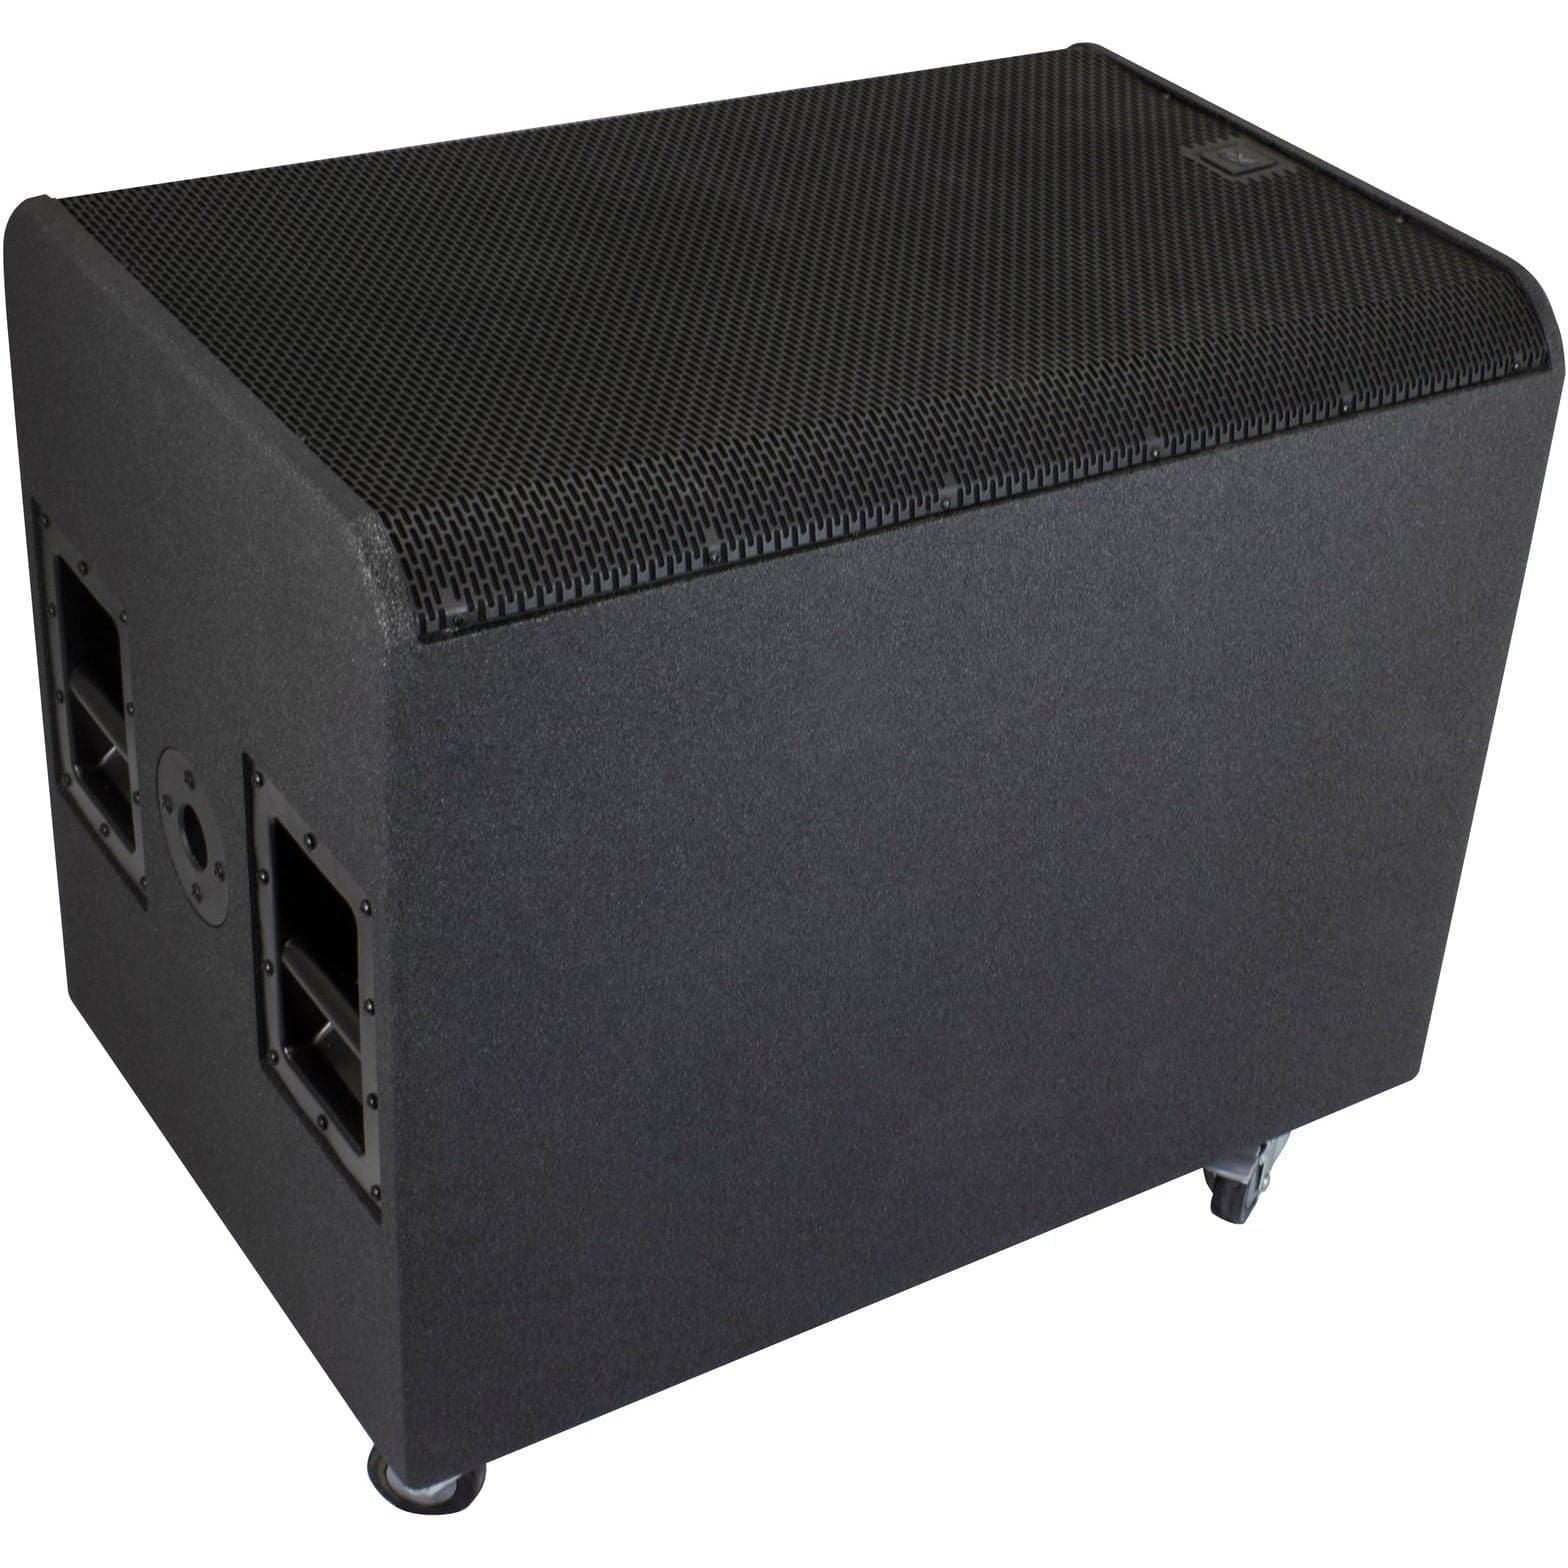 Peavey RBN Series "RBN-215" Powered 2000W, 2x15" PA Subwoofer